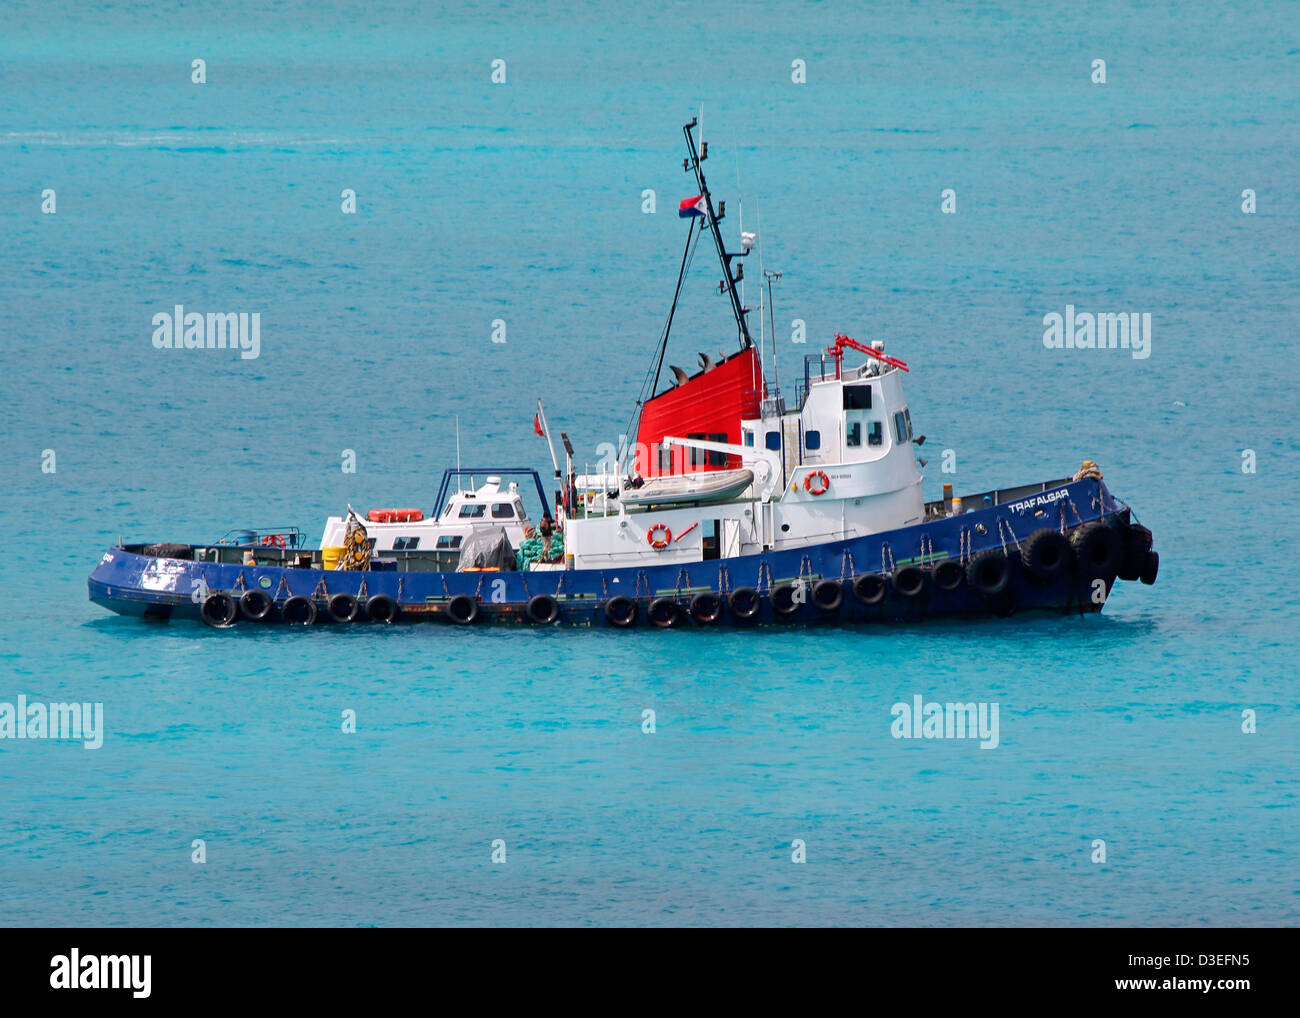 TRADITIONAL TUGBOAT IN TROPICAL  WATERS Stock Photo